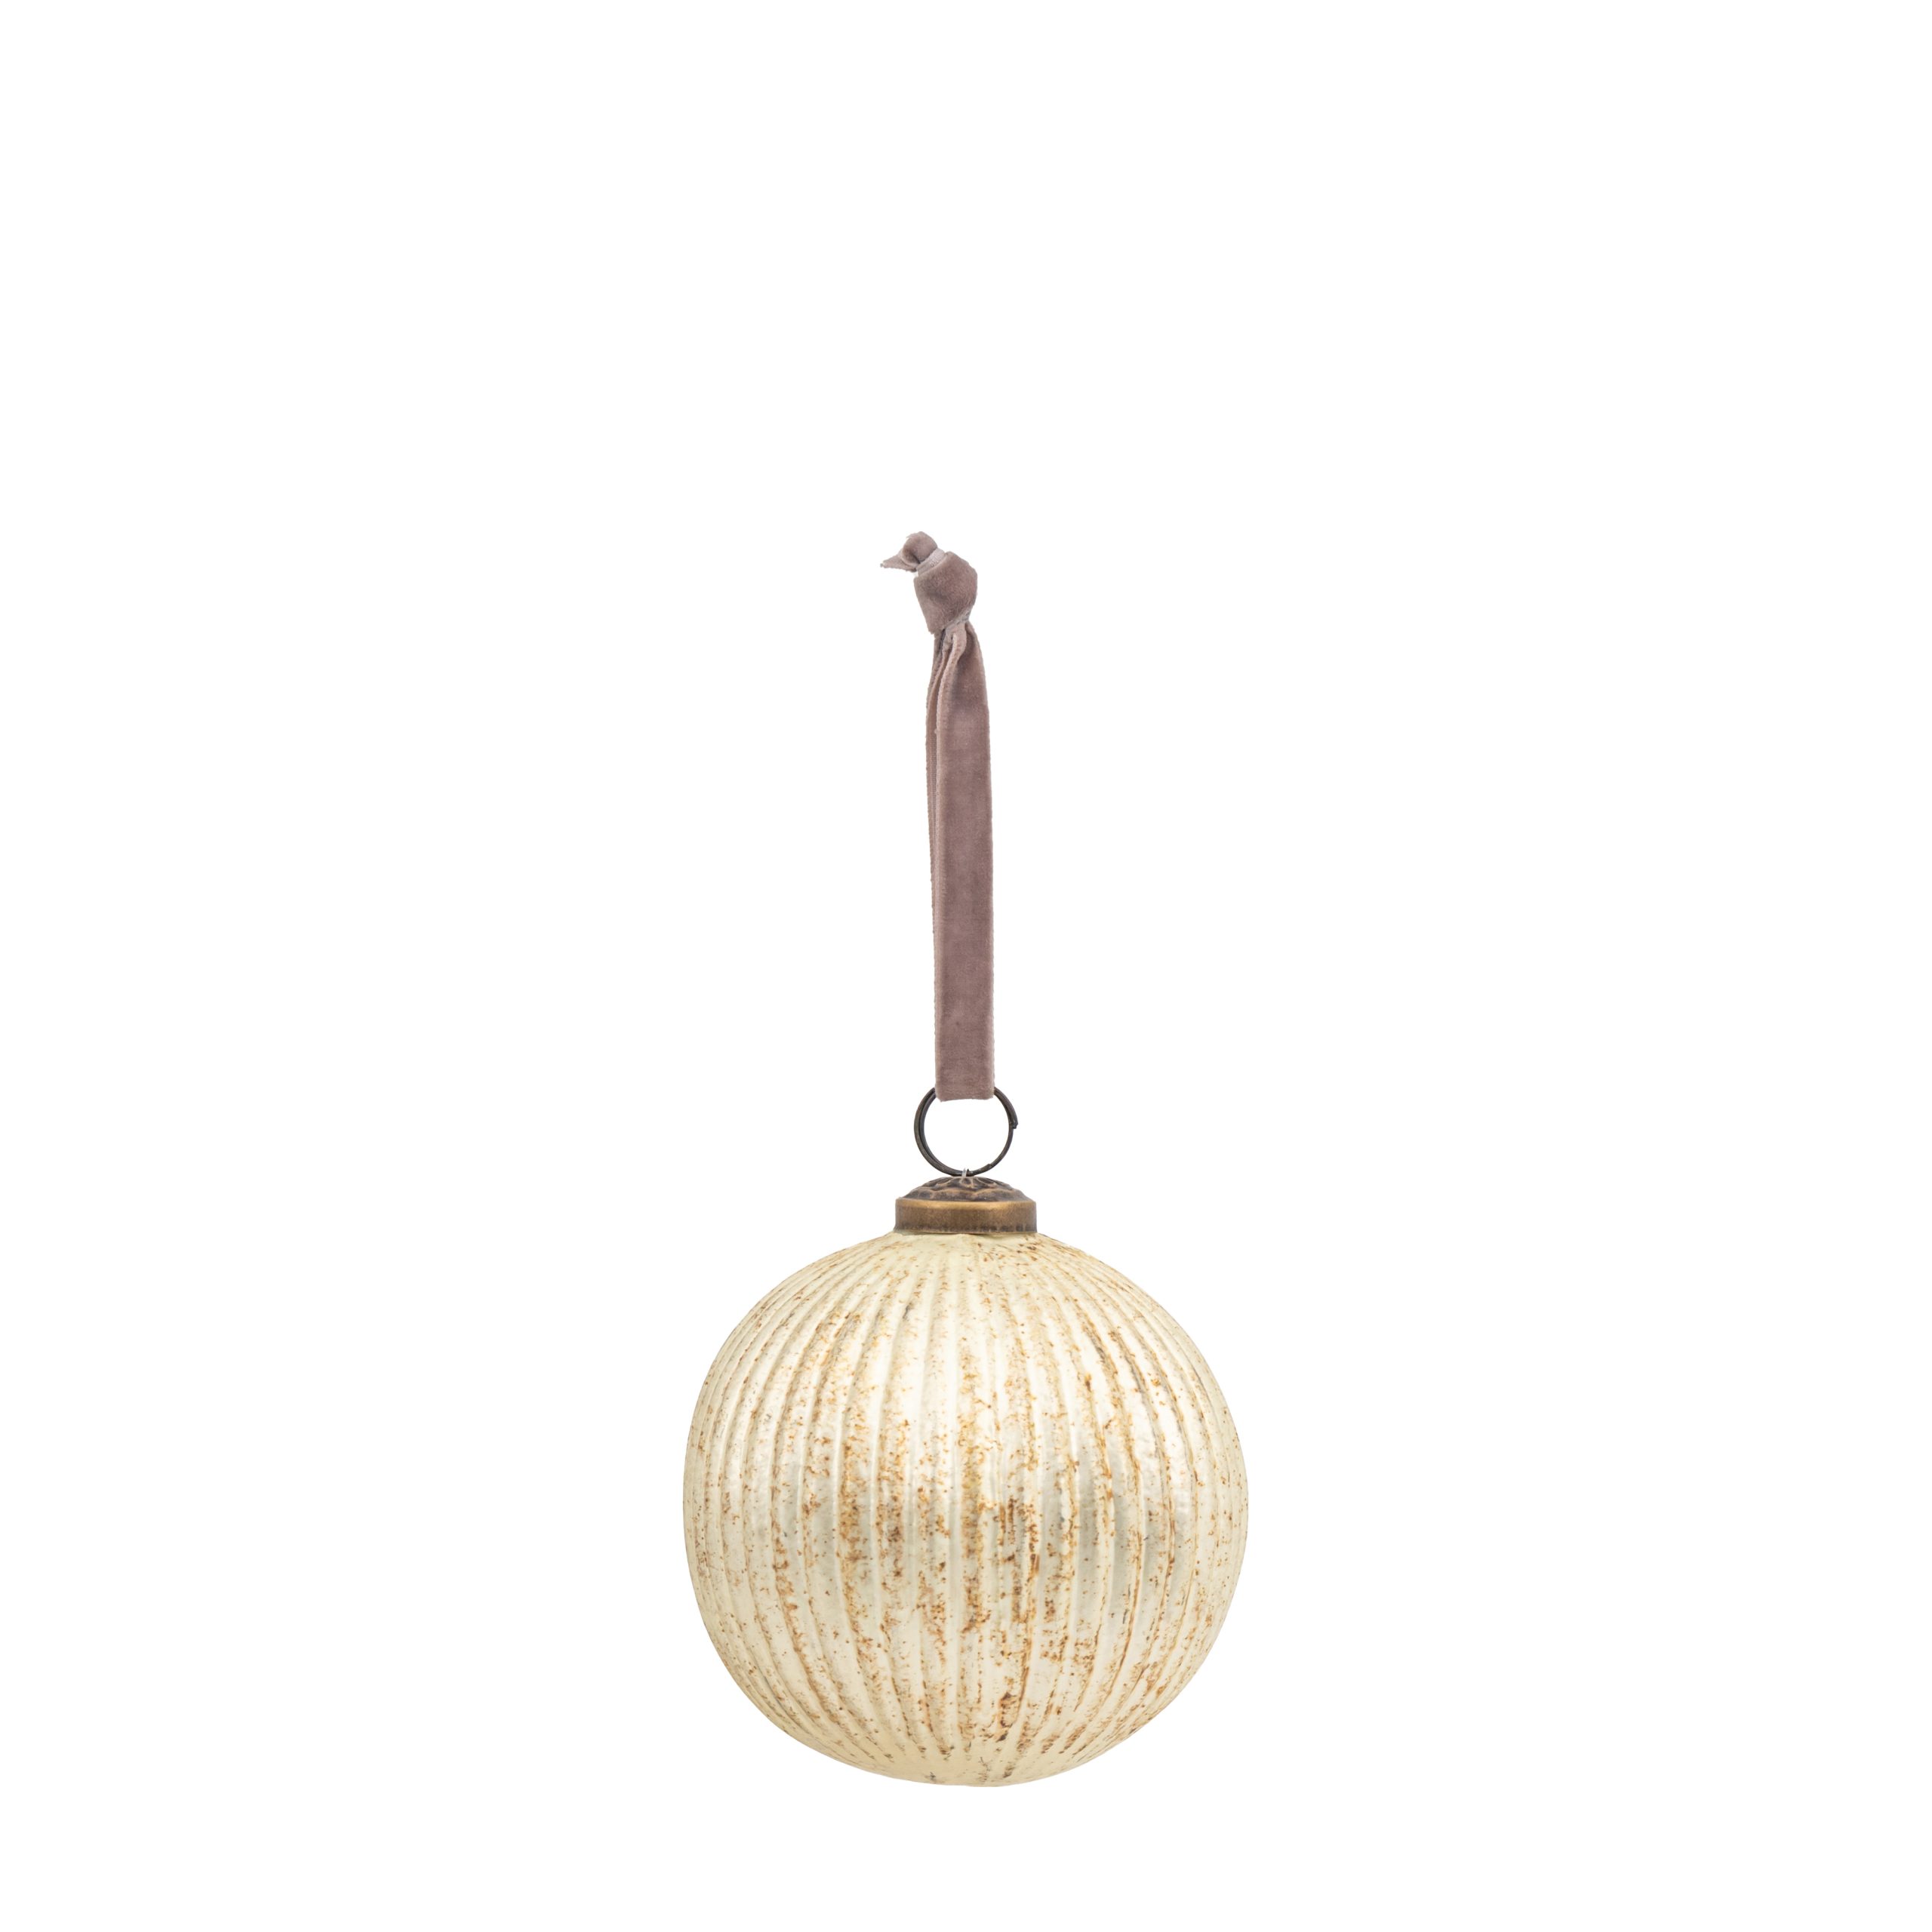 Gallery Direct Mia Bauble Antique Gold (Set of 6